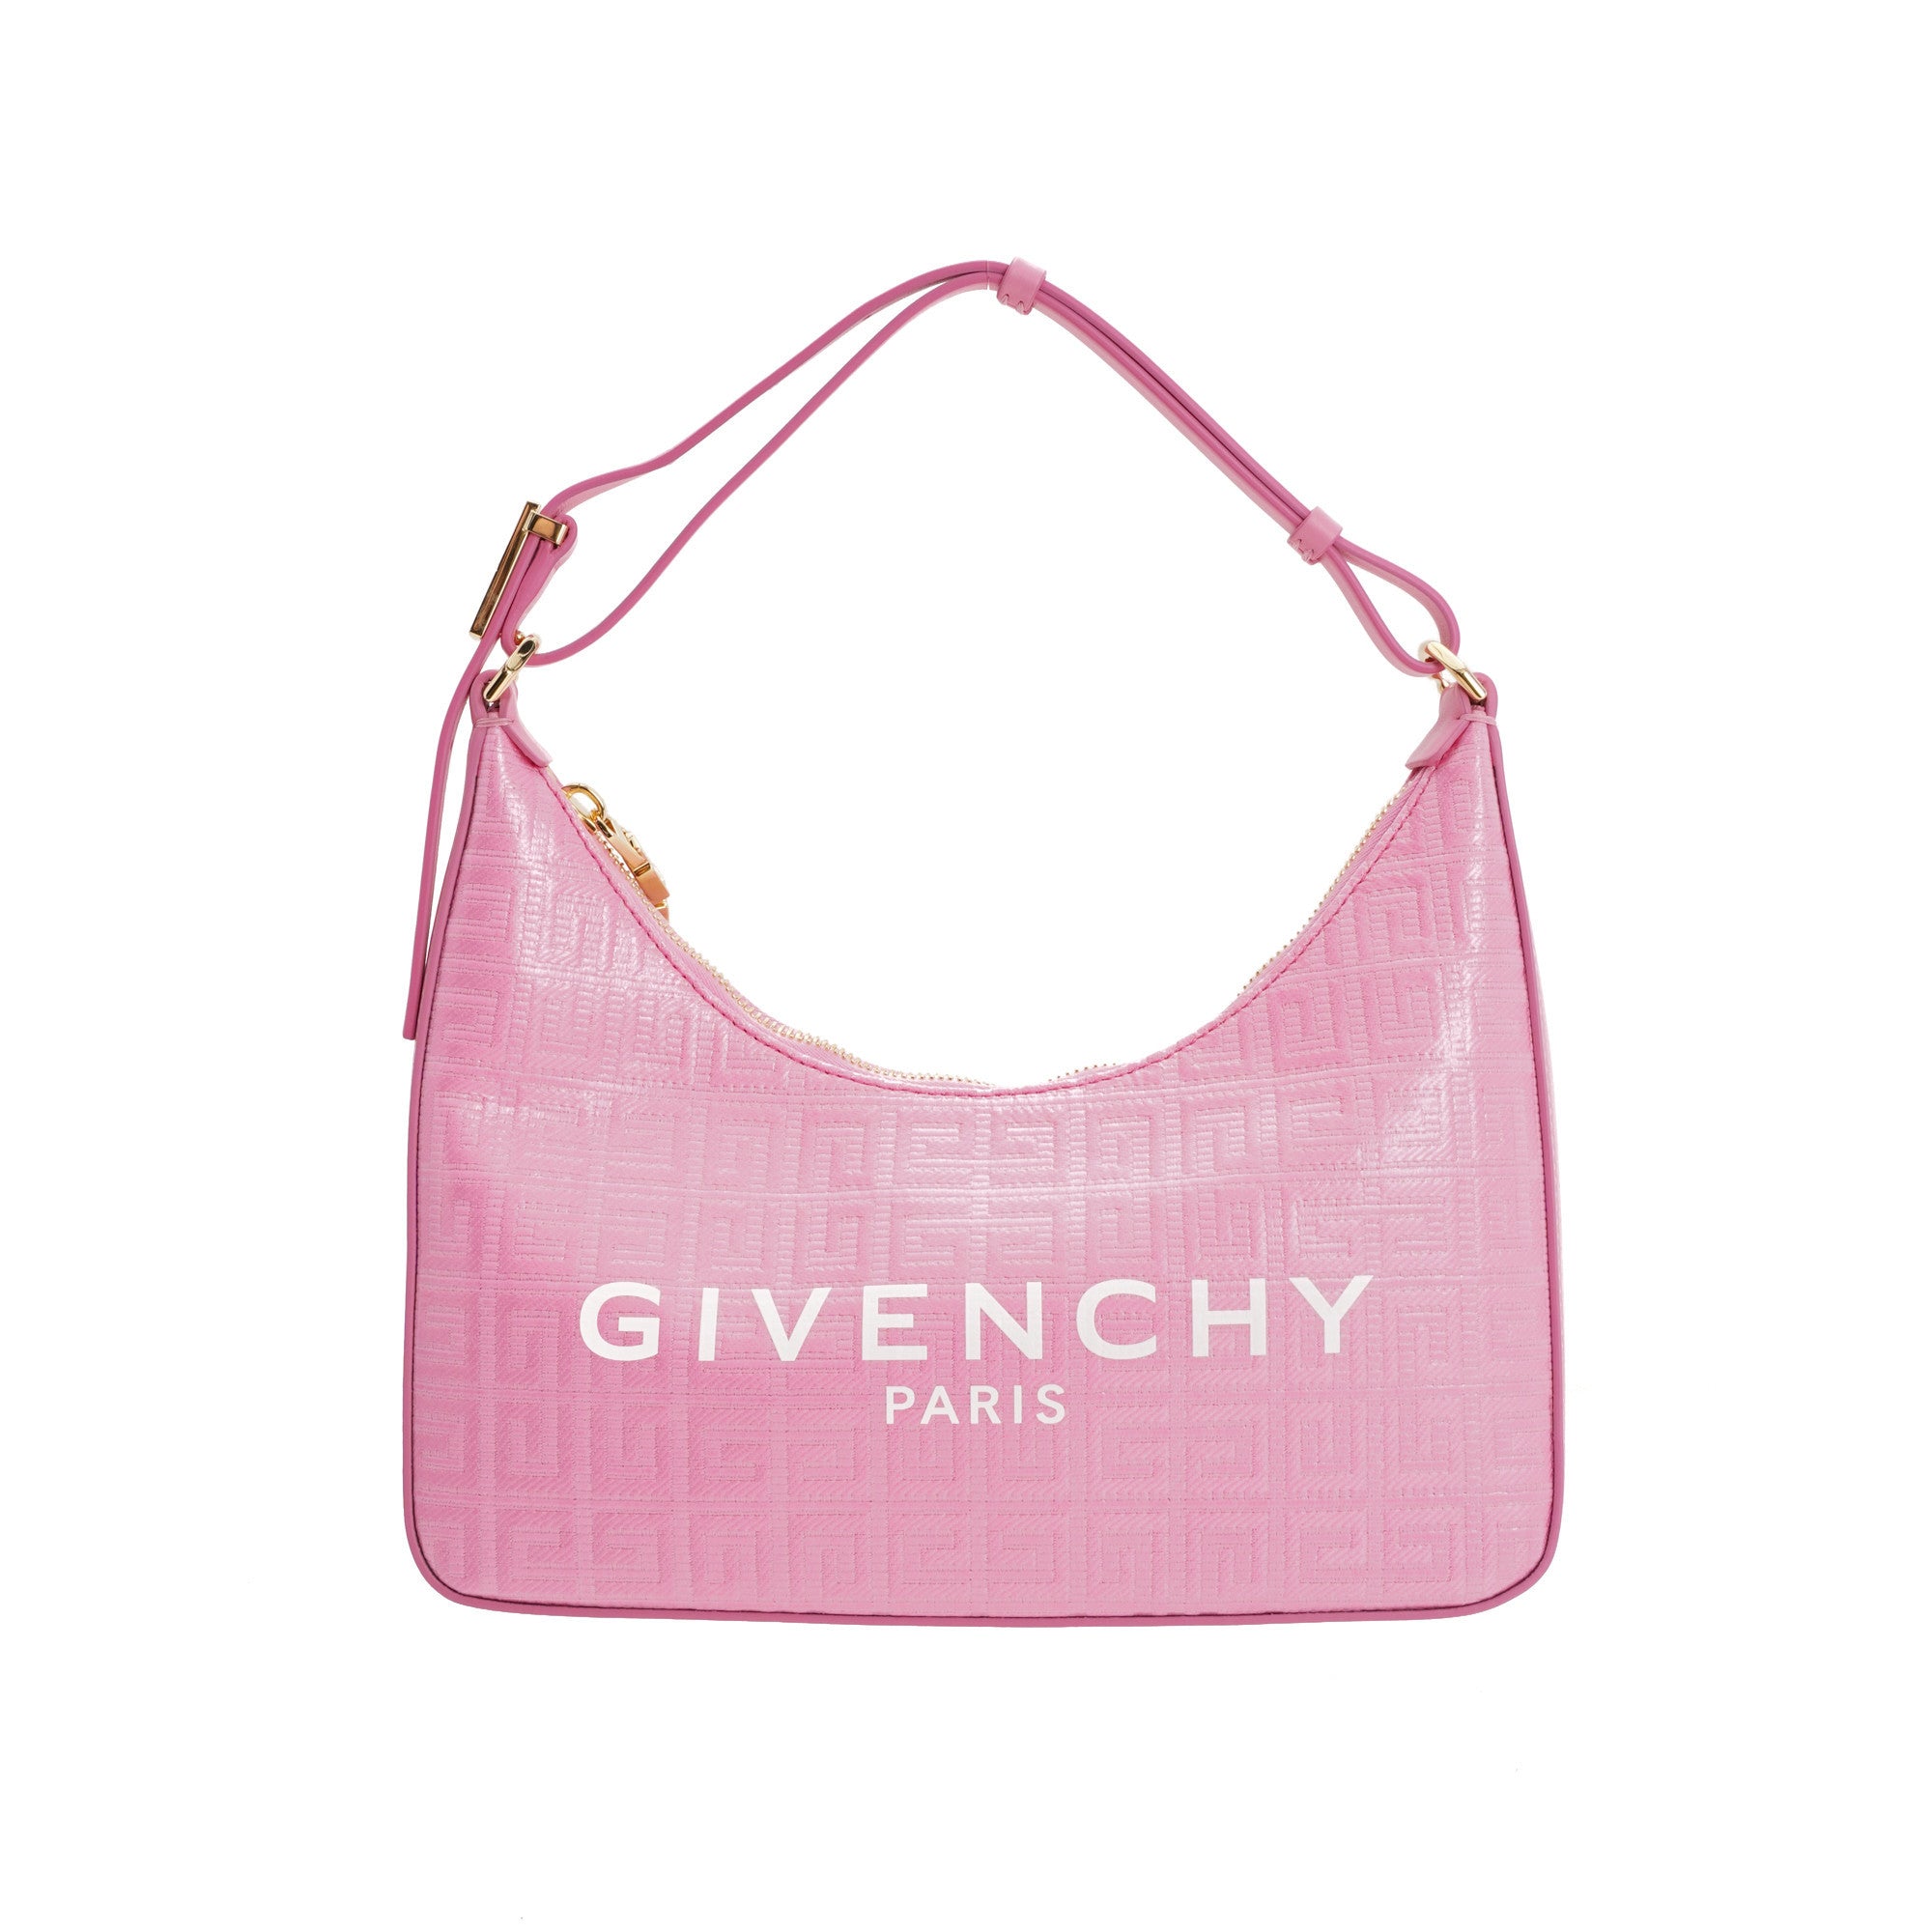 Givenchy Bags & Purses for Sale at Auction